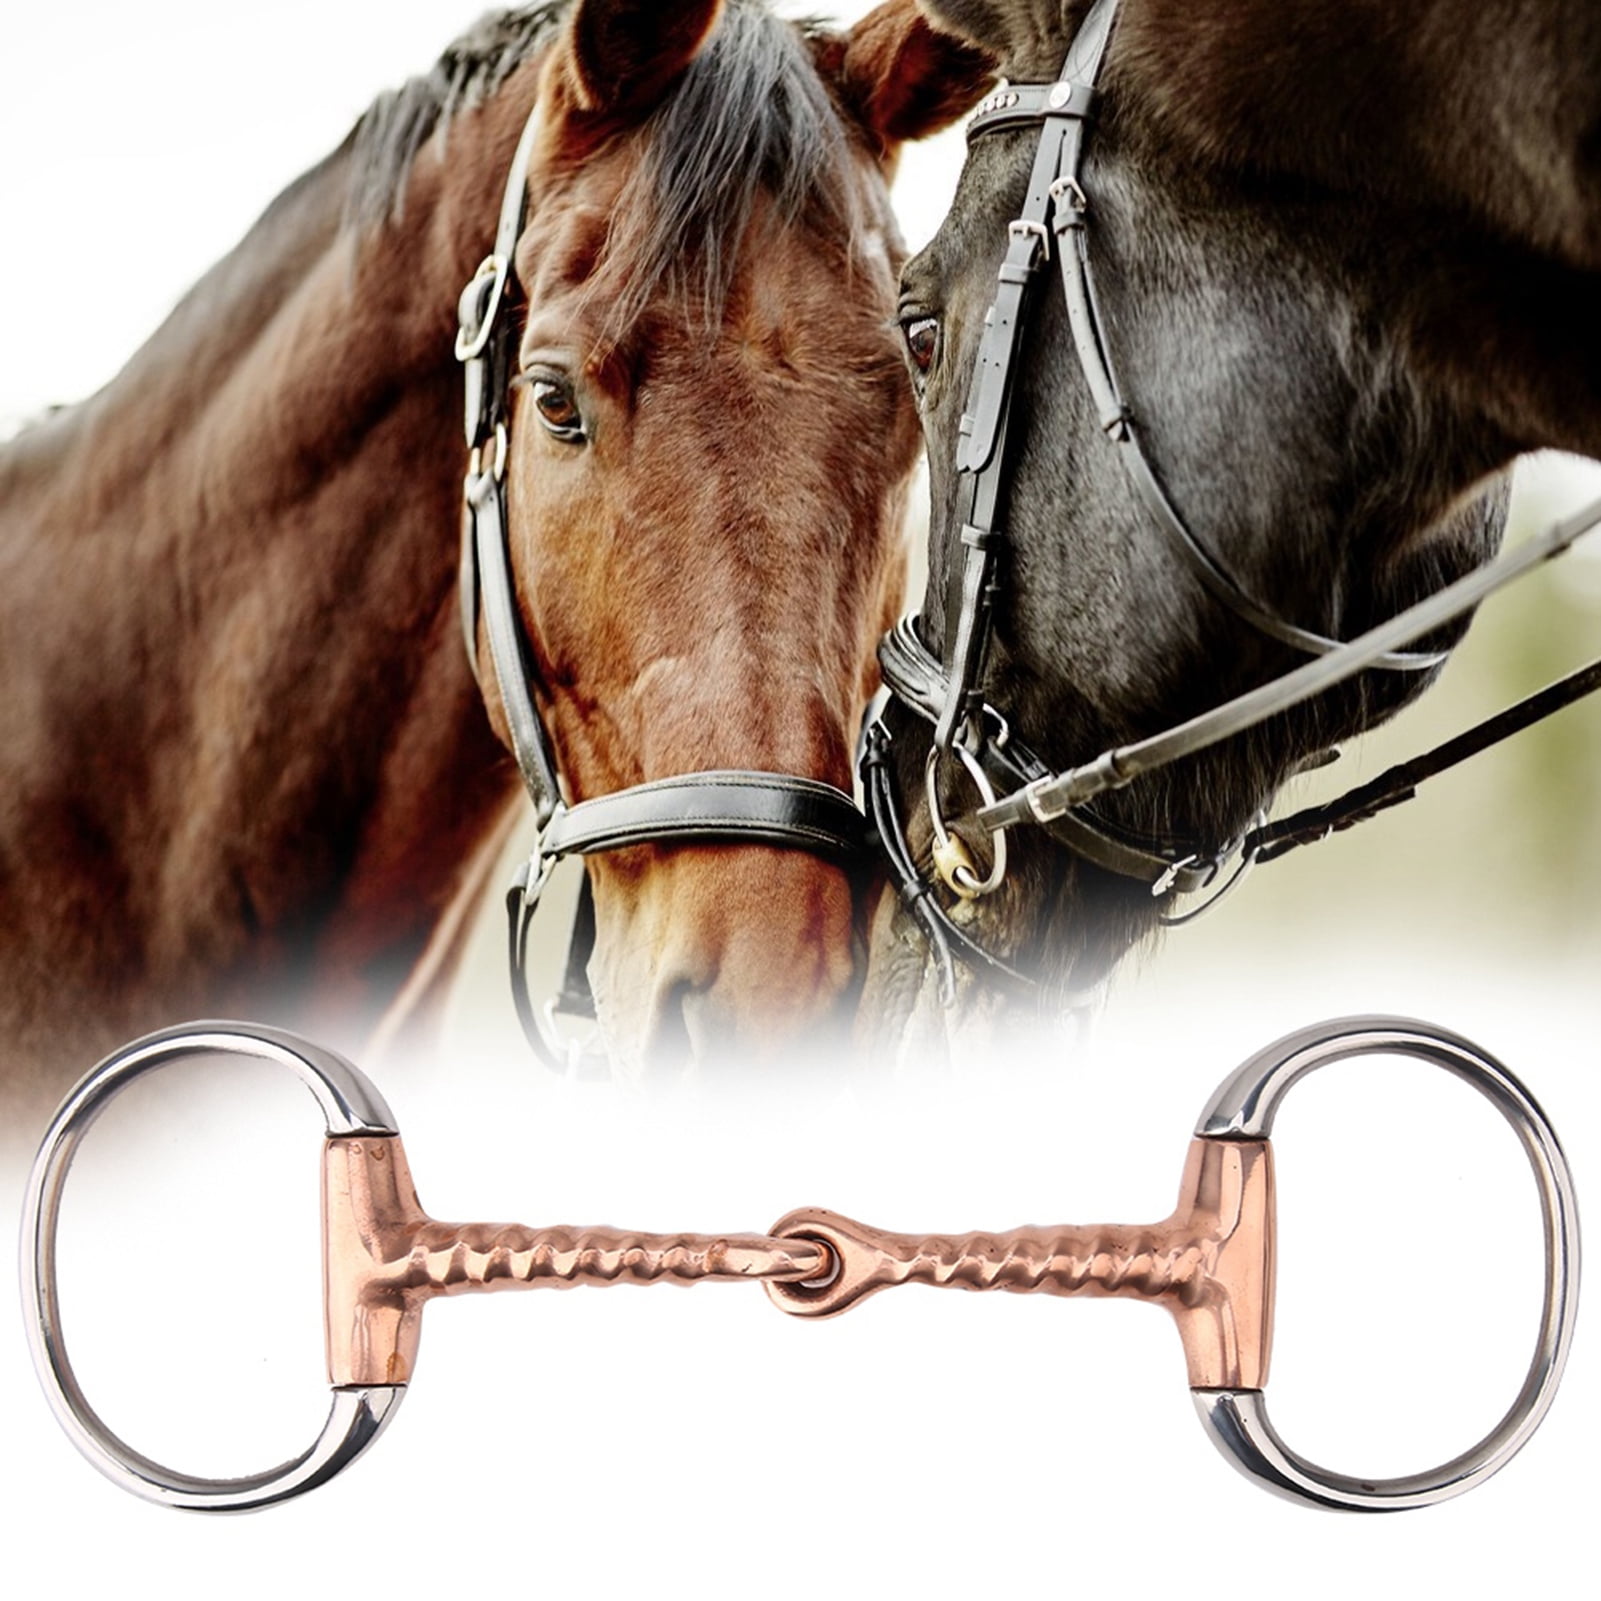 Gag Snaffle Bits Equestrian Loose Easy Directional Aids Farm For Horse Correct 